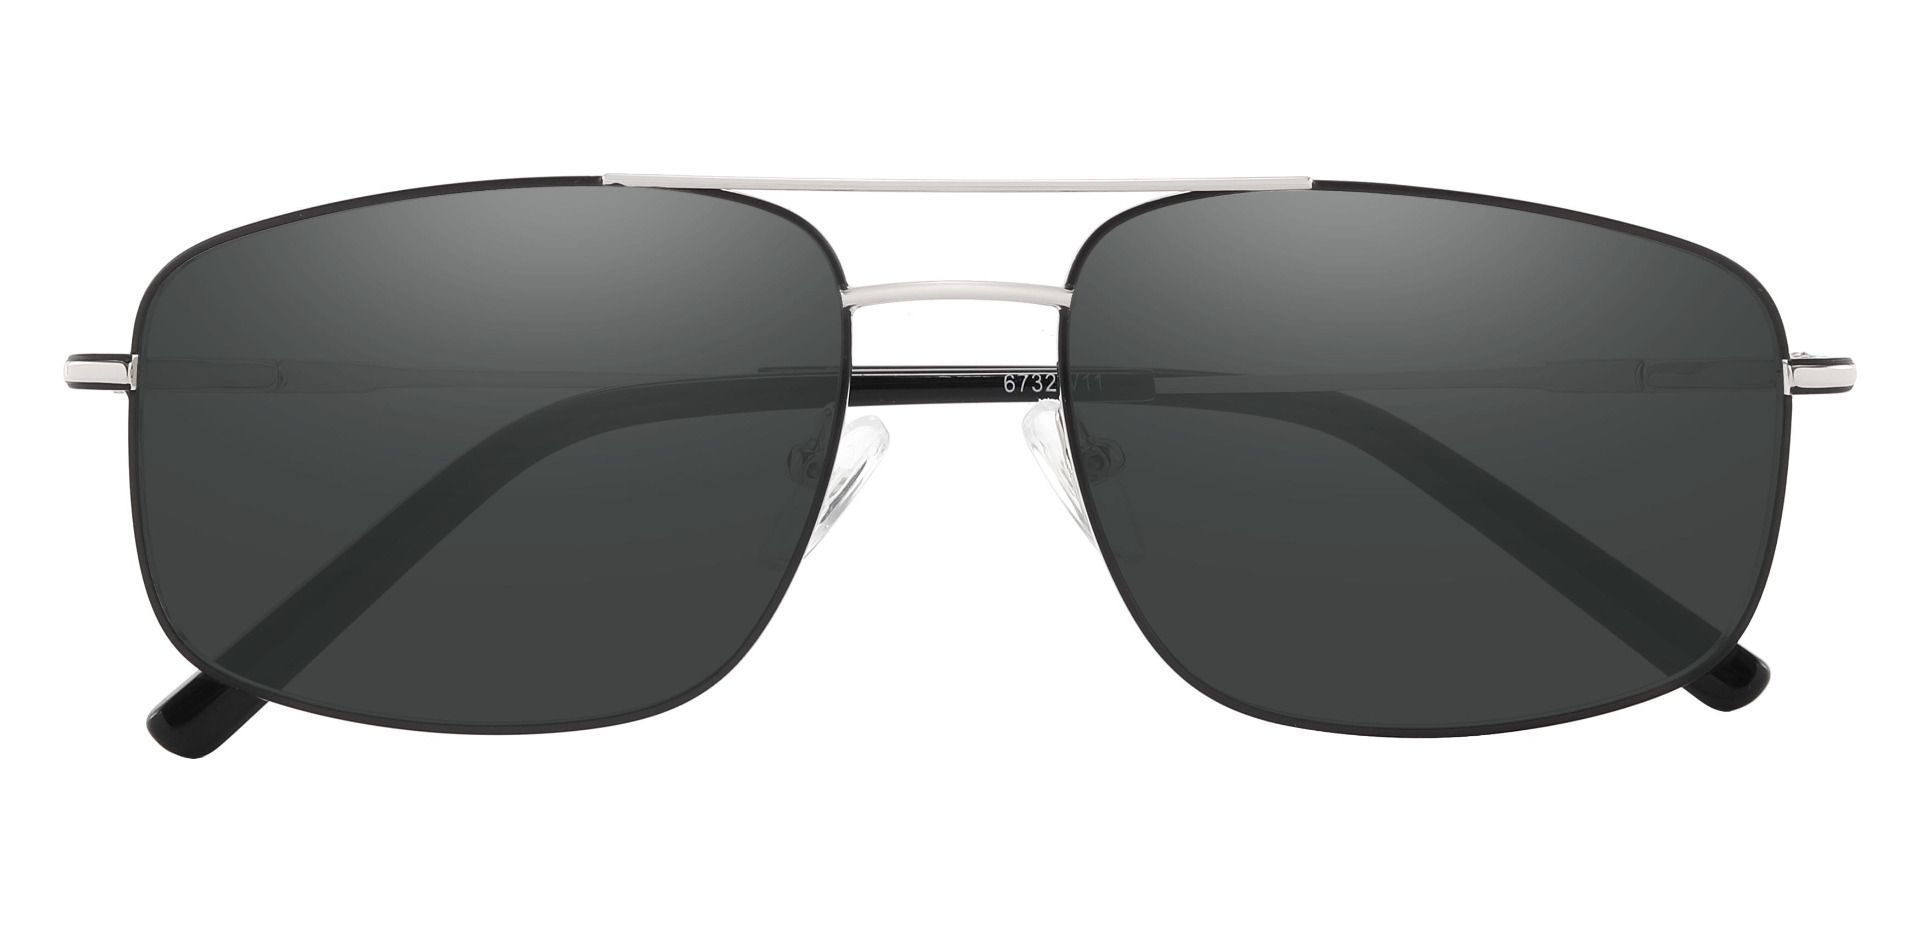 Turner Aviator Non-Rx Sunglasses - Silver Frame With Gray Lenses